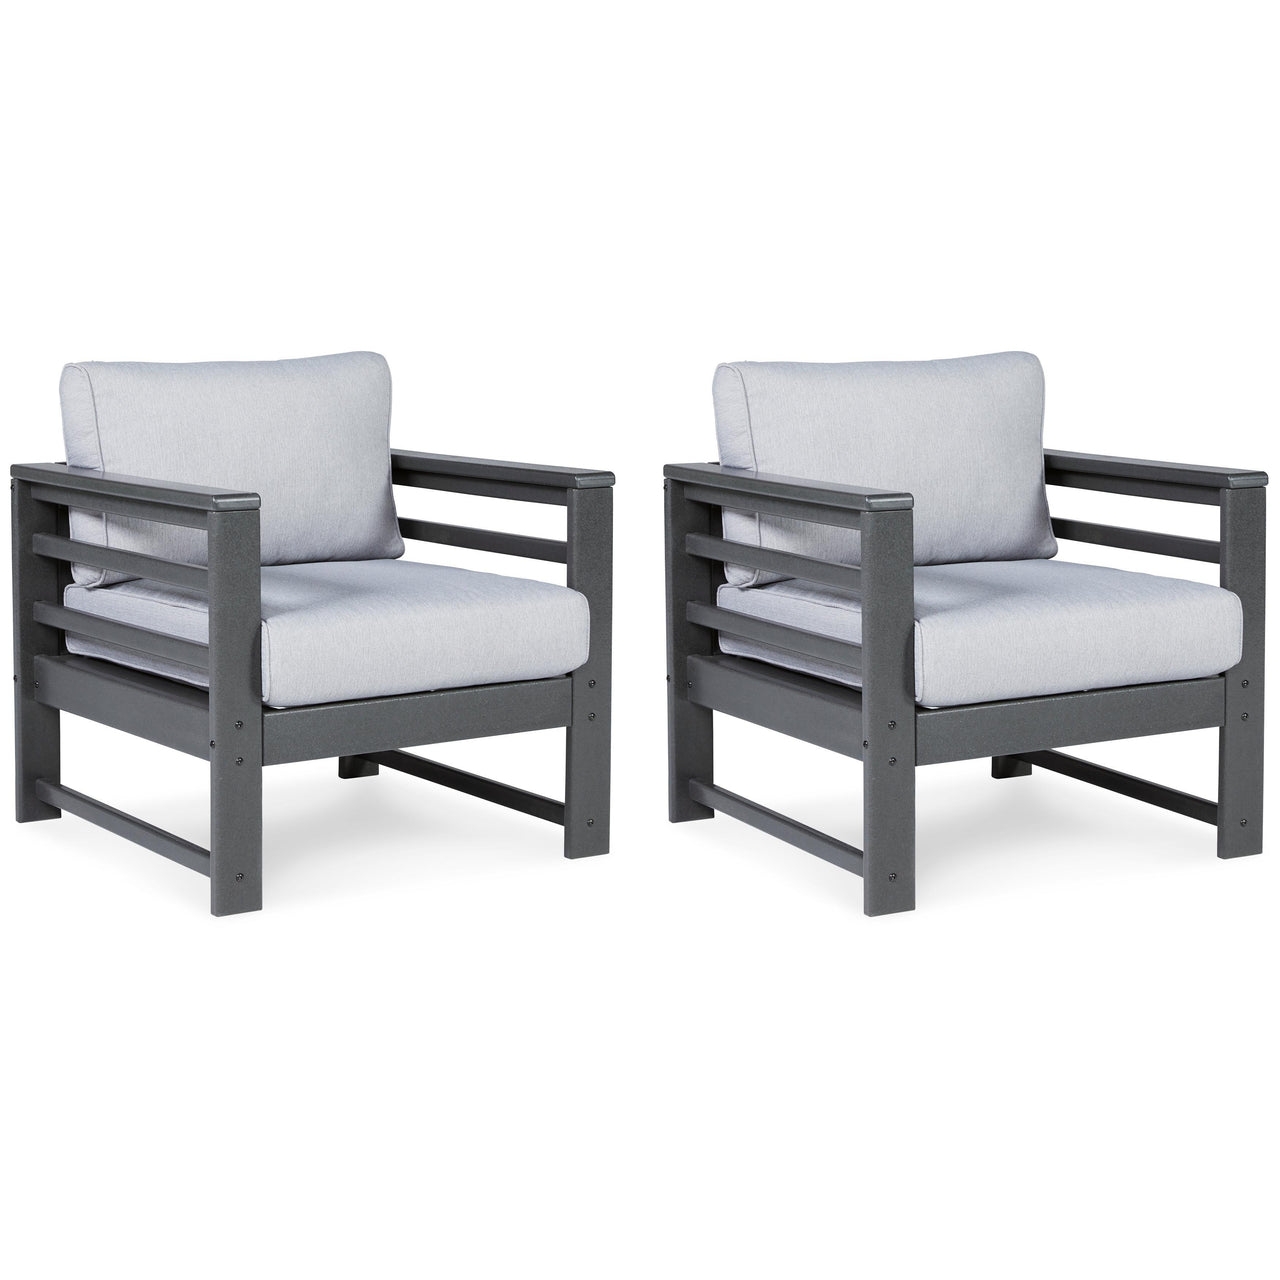 Amora - Charcoal Gray - Lounge Chair W/Cushion (Set of 2) Tony's Home Furnishings Furniture. Beds. Dressers. Sofas.